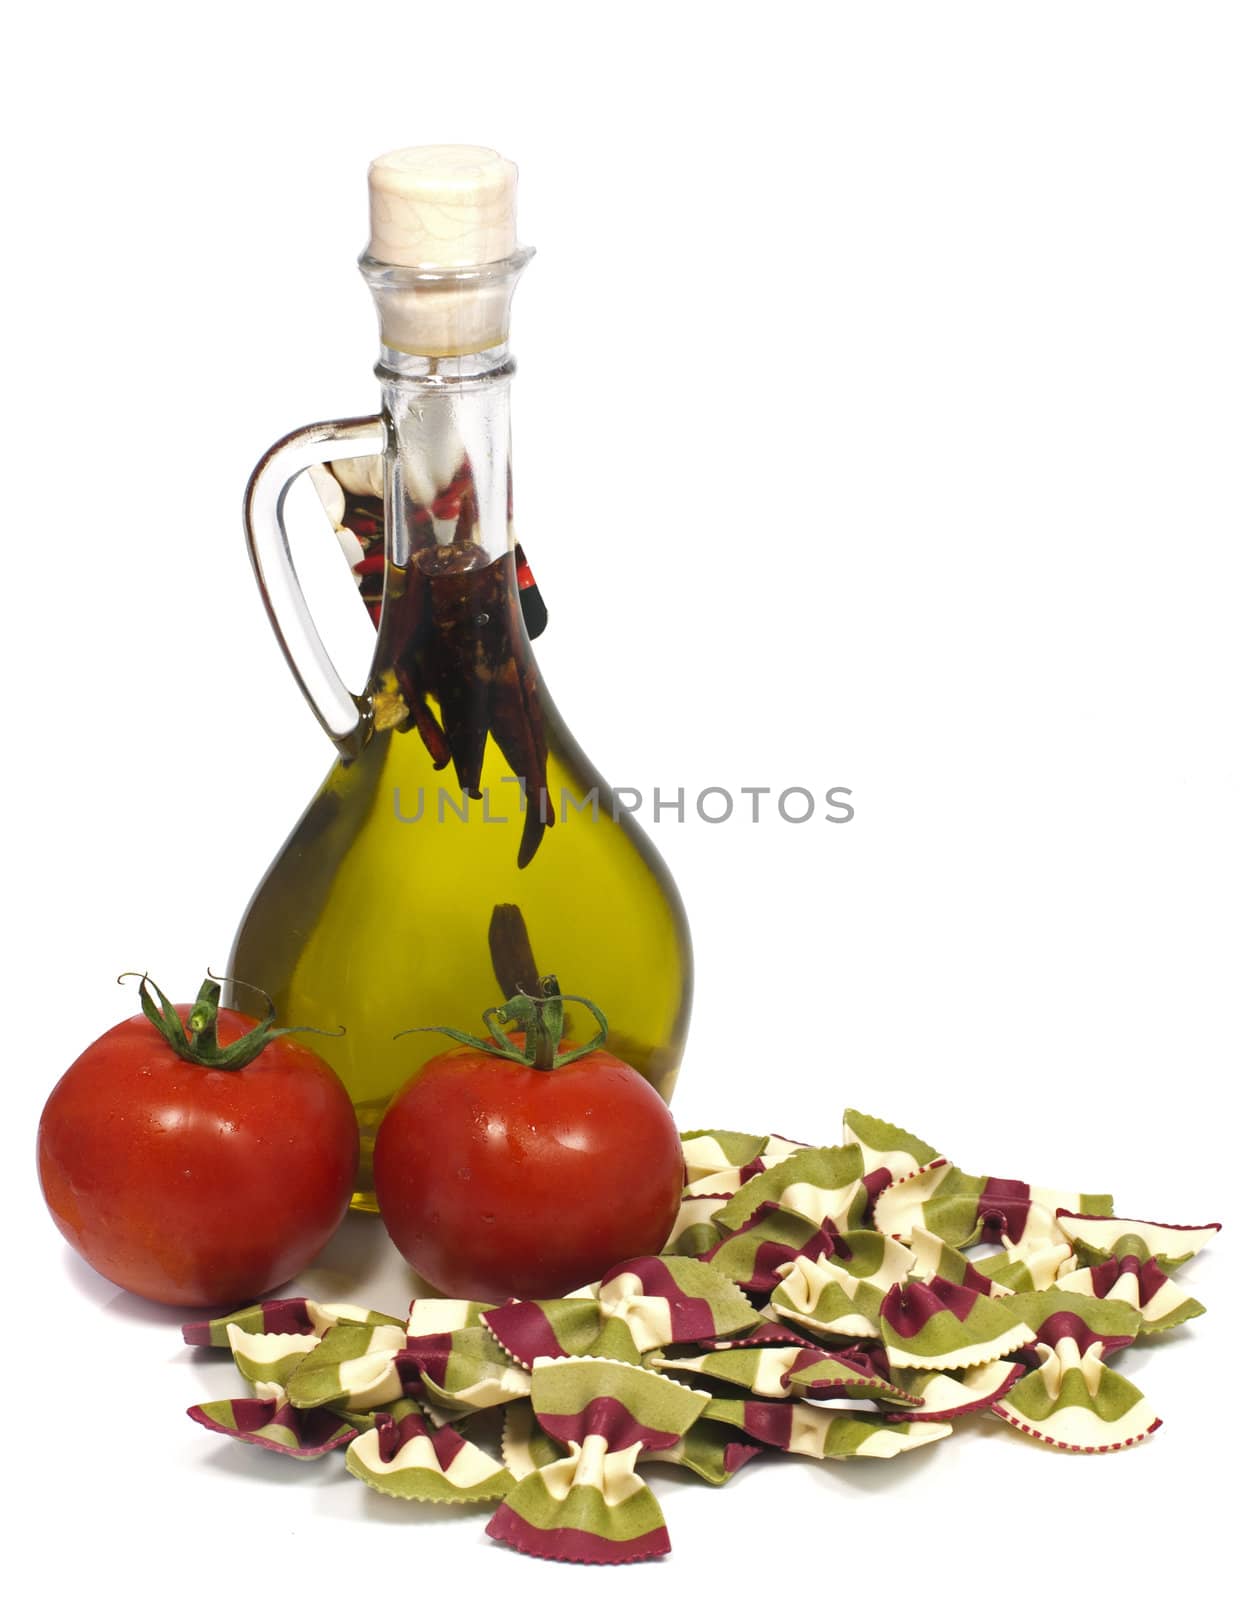 olive oil tomato and butterfly pasta as food ingredients